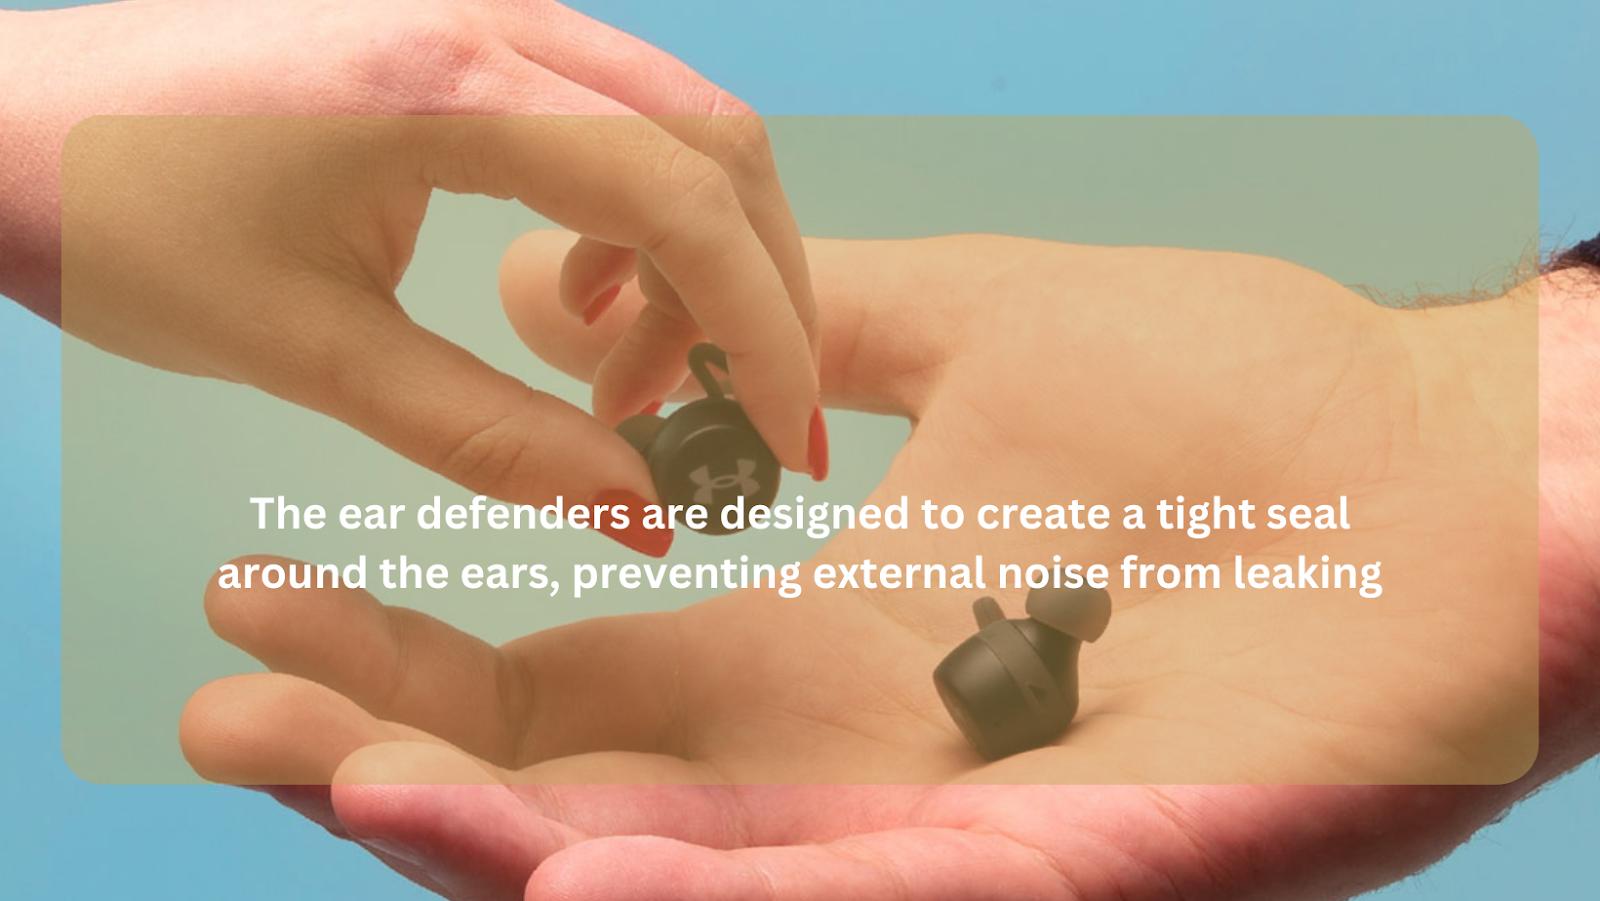 Protective ear defenders with noise reduction capabilities for a peaceful experience.